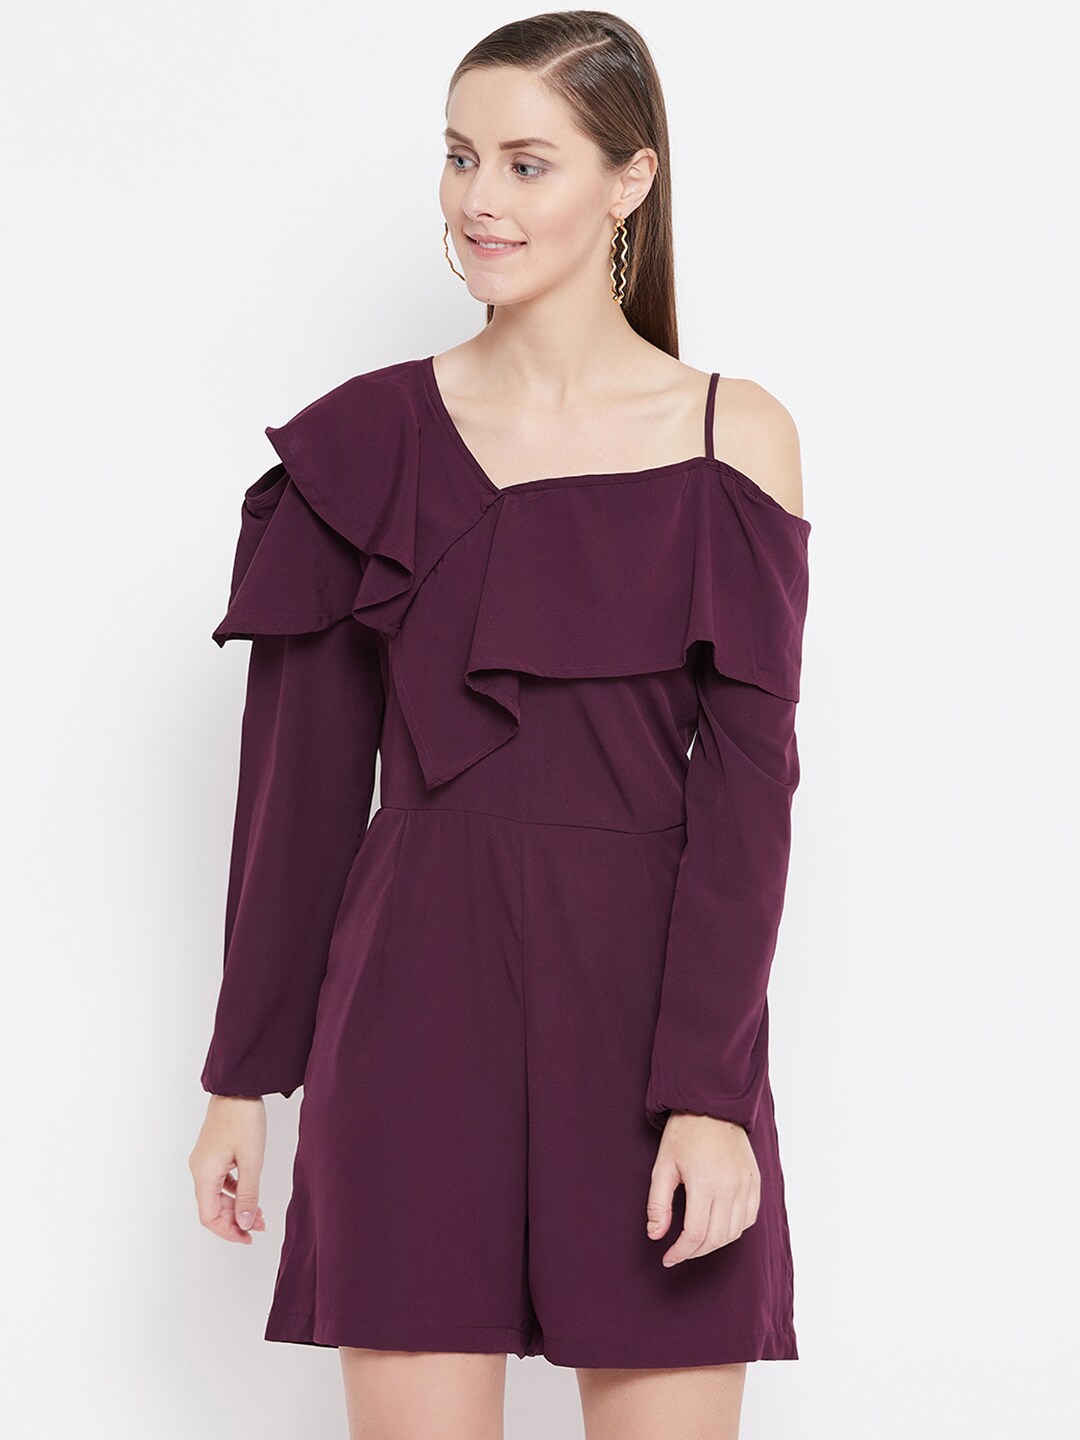 Belle Fille Women Burgundy One-Shoulder Solid Playsuit Price in India